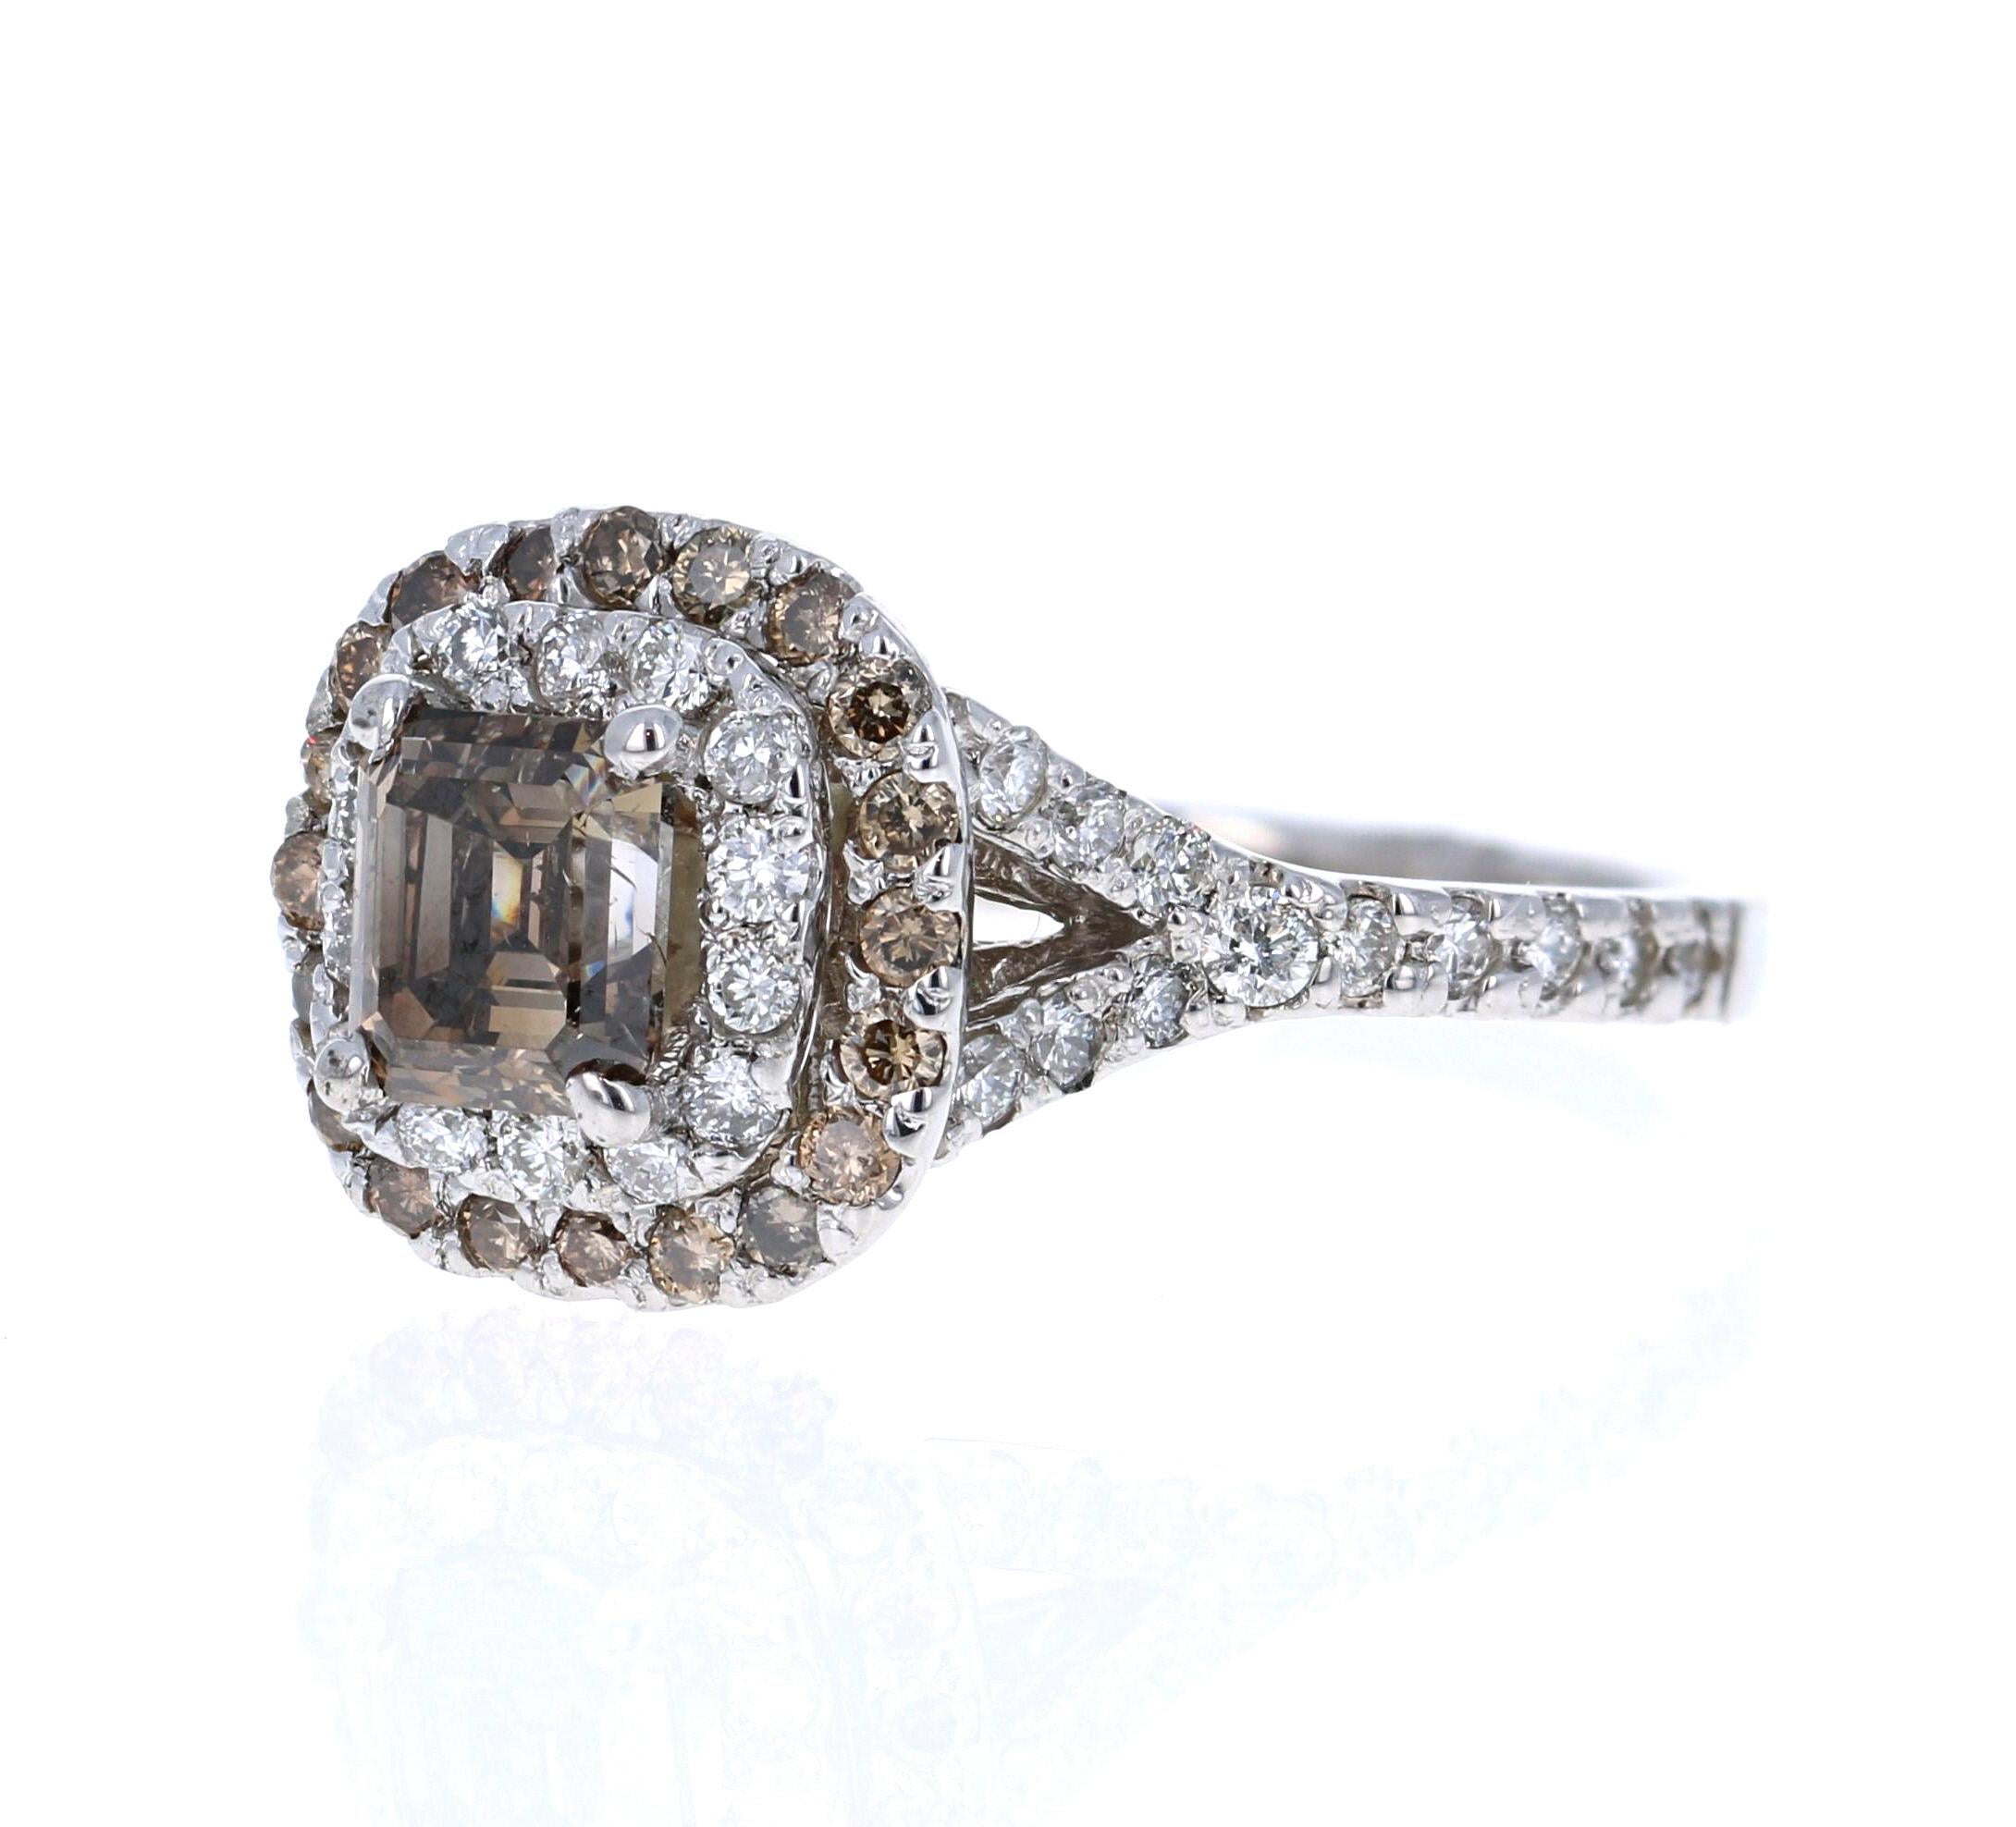 This beautiful engagement ring has a Emerald Cut Champagne Diamond that weighs 1.01 carats with a clarity of SI1. It has a halo of 38 Round Cut Diamonds that weigh 0.47 carats (SI-F) and another halo of 20 Champagne Round Cut Diamonds that weigh